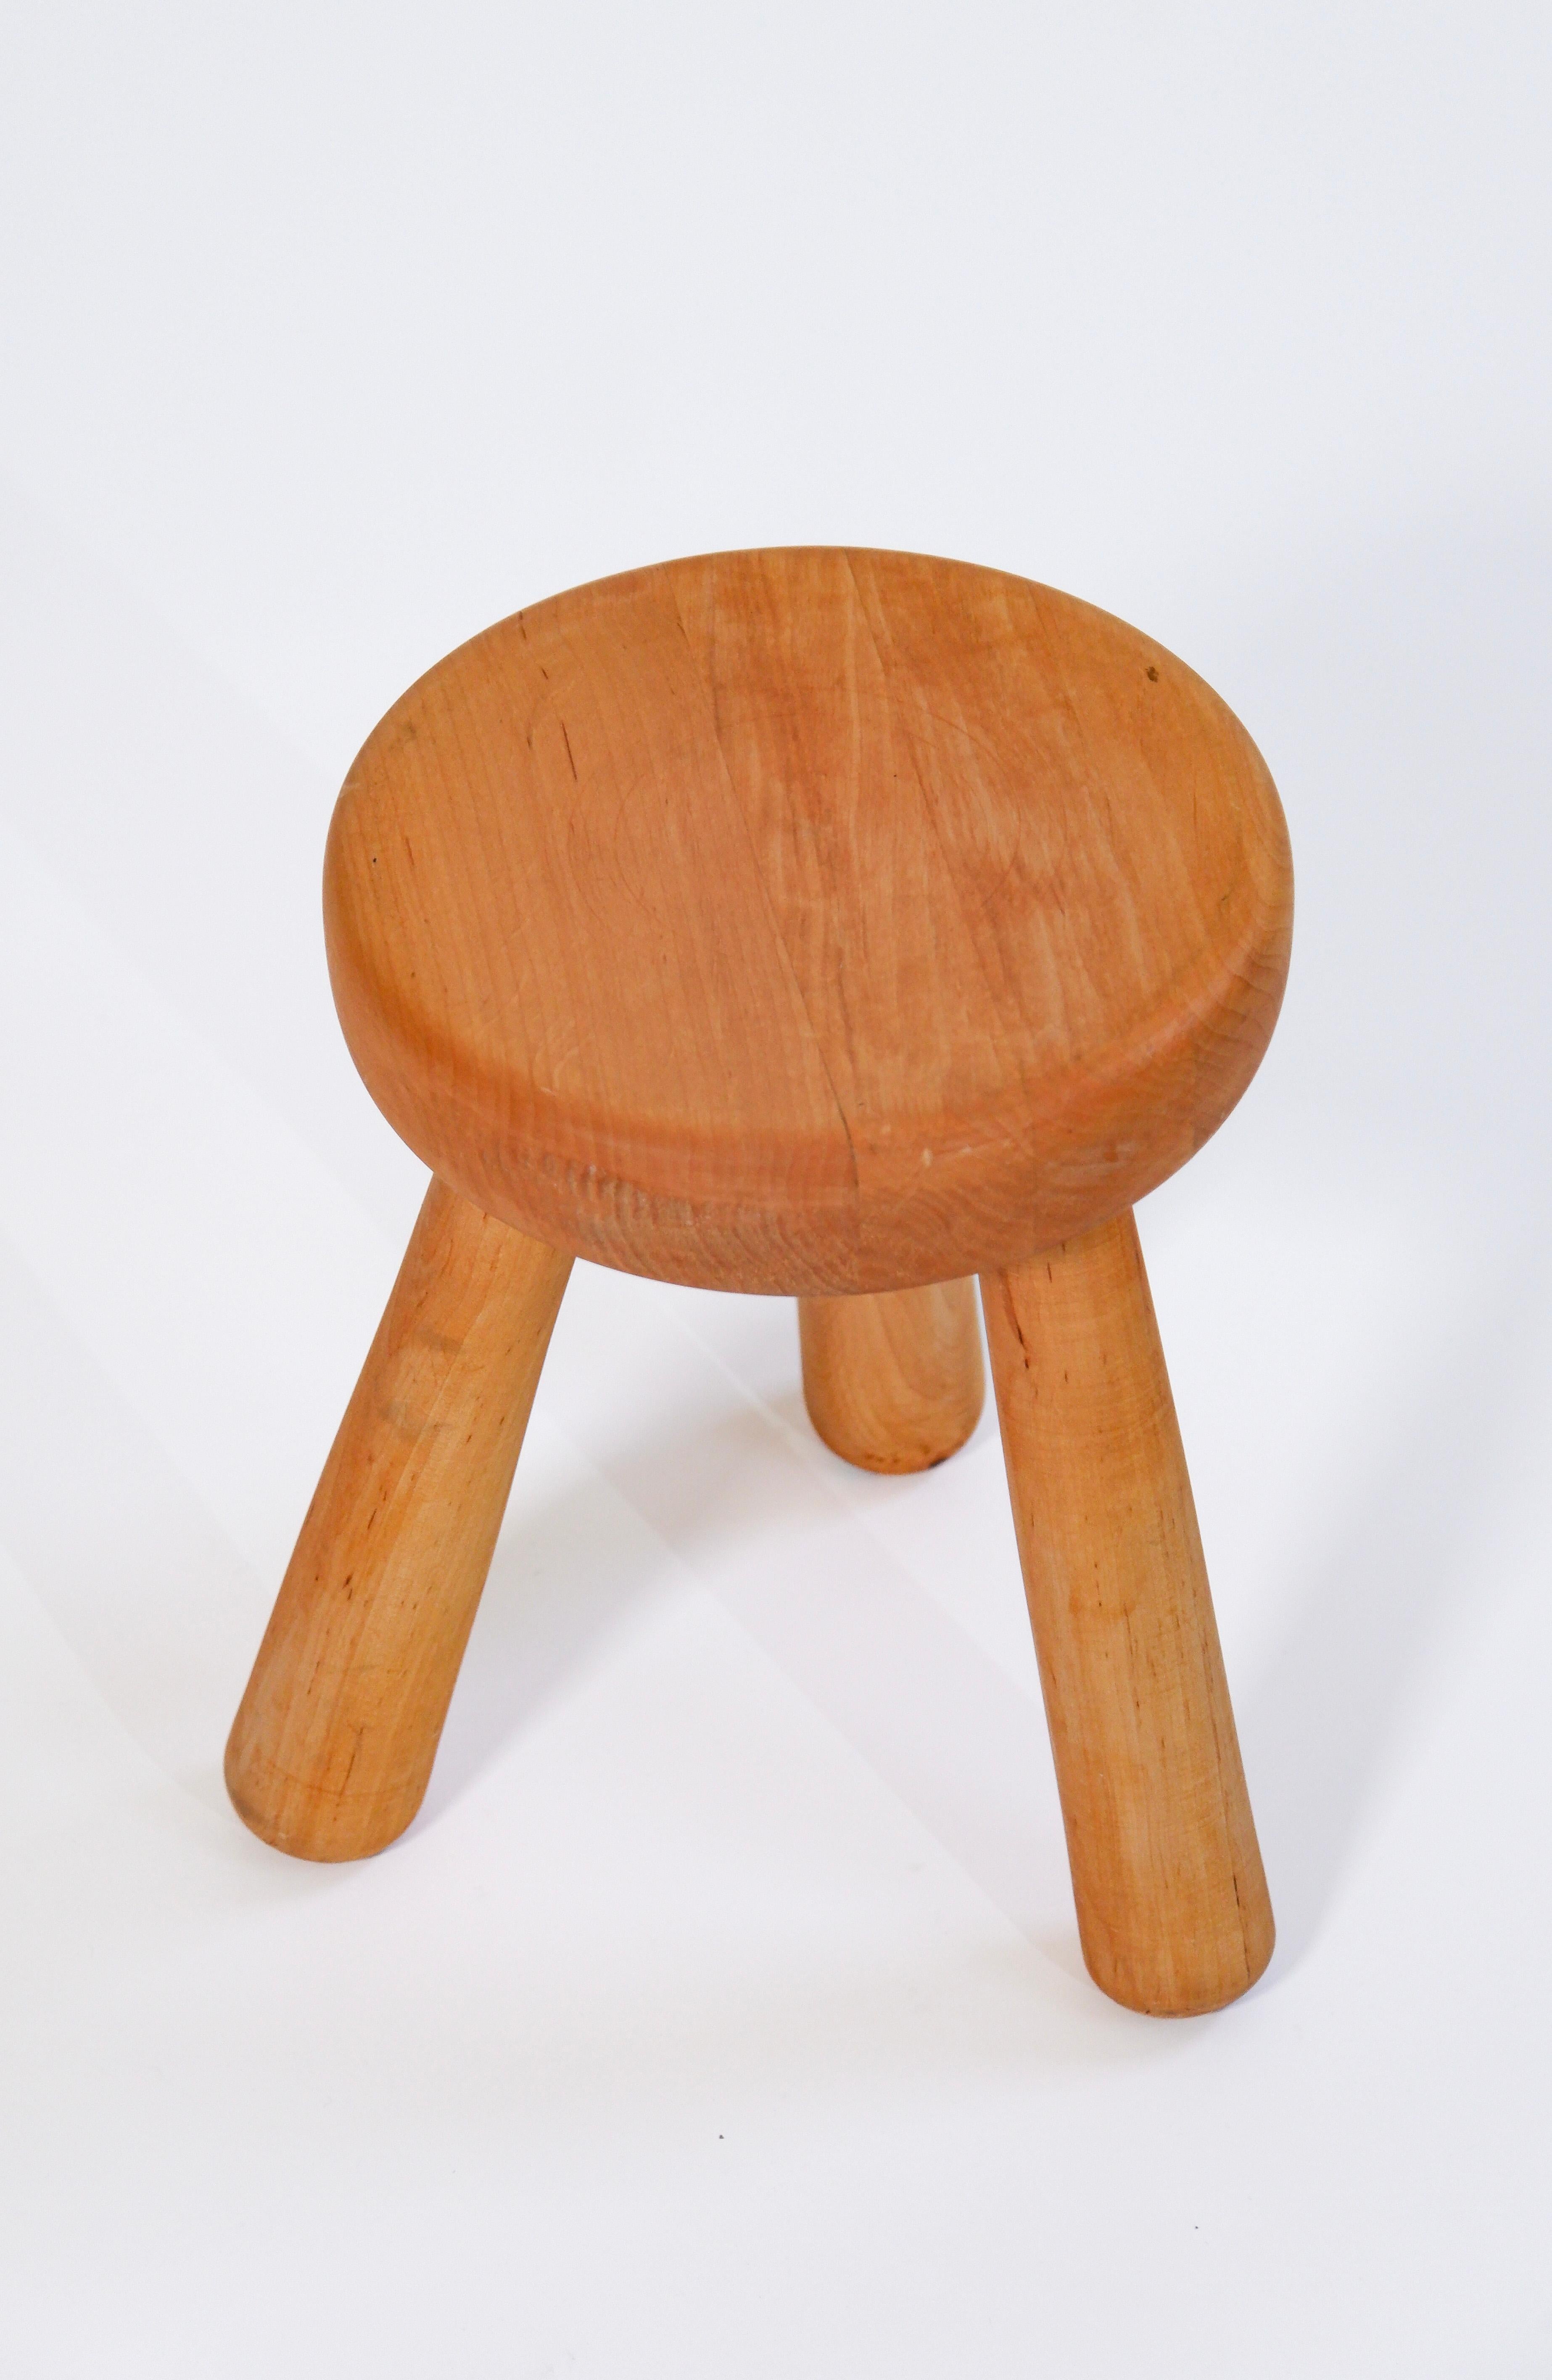 Hingvar Hildingsson stool made in birch circa 1980. Produced in Sweden, the stool is stamp and marked by the artist. Dimensions : H: 34 cm / L: 24 cm.Ingvar Hildingsson stool are based on rural and folk swedish art from the late XVIII. Other famous